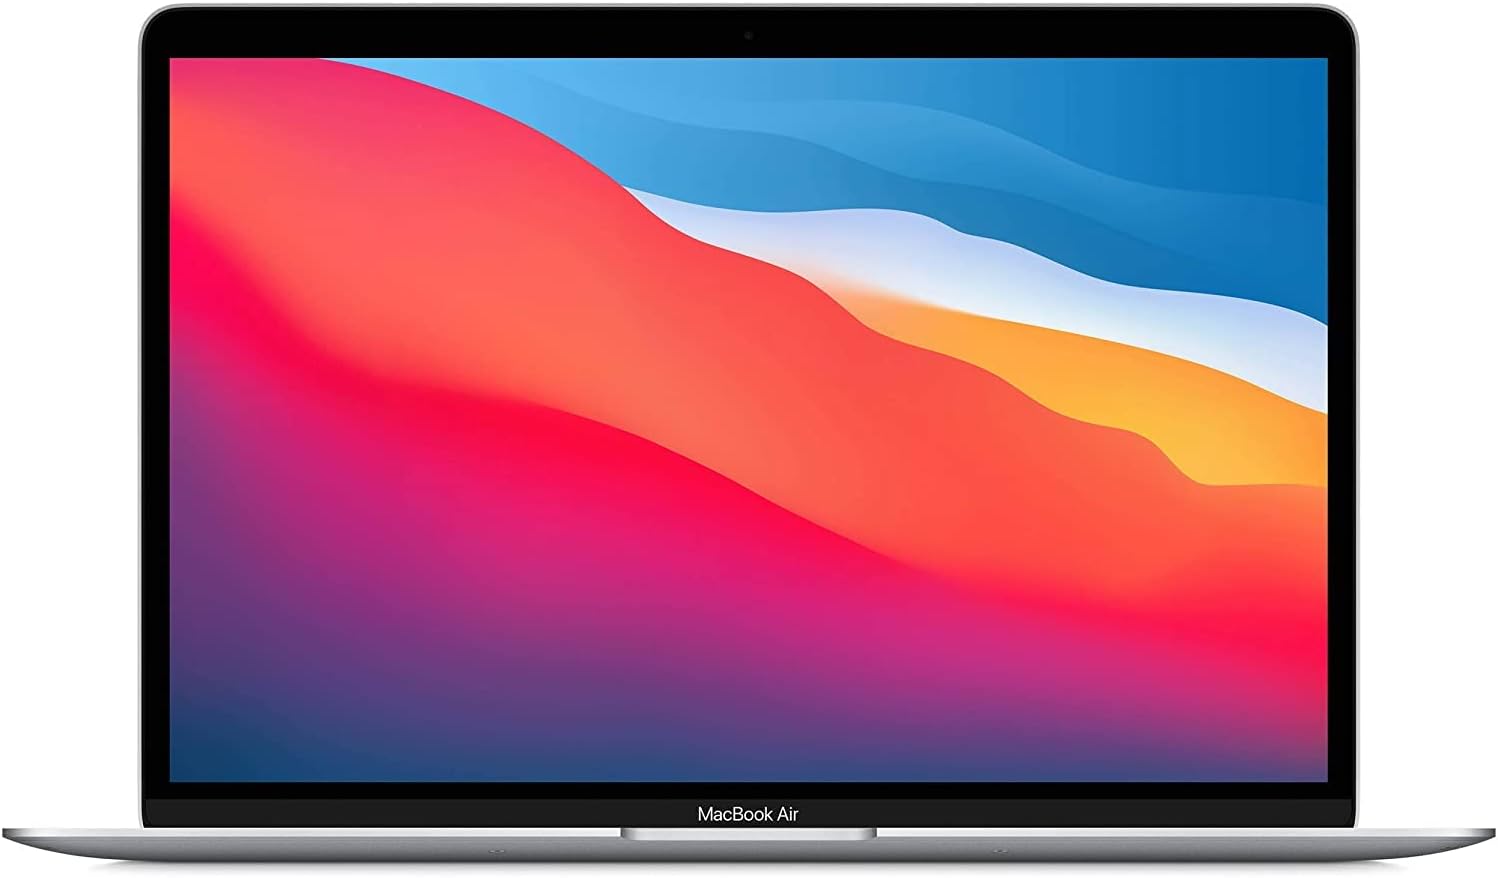 Apple MacBook Air 13-inch Laptop - All-Day Battery Life up to 18 hours for extended use. 0194252057179